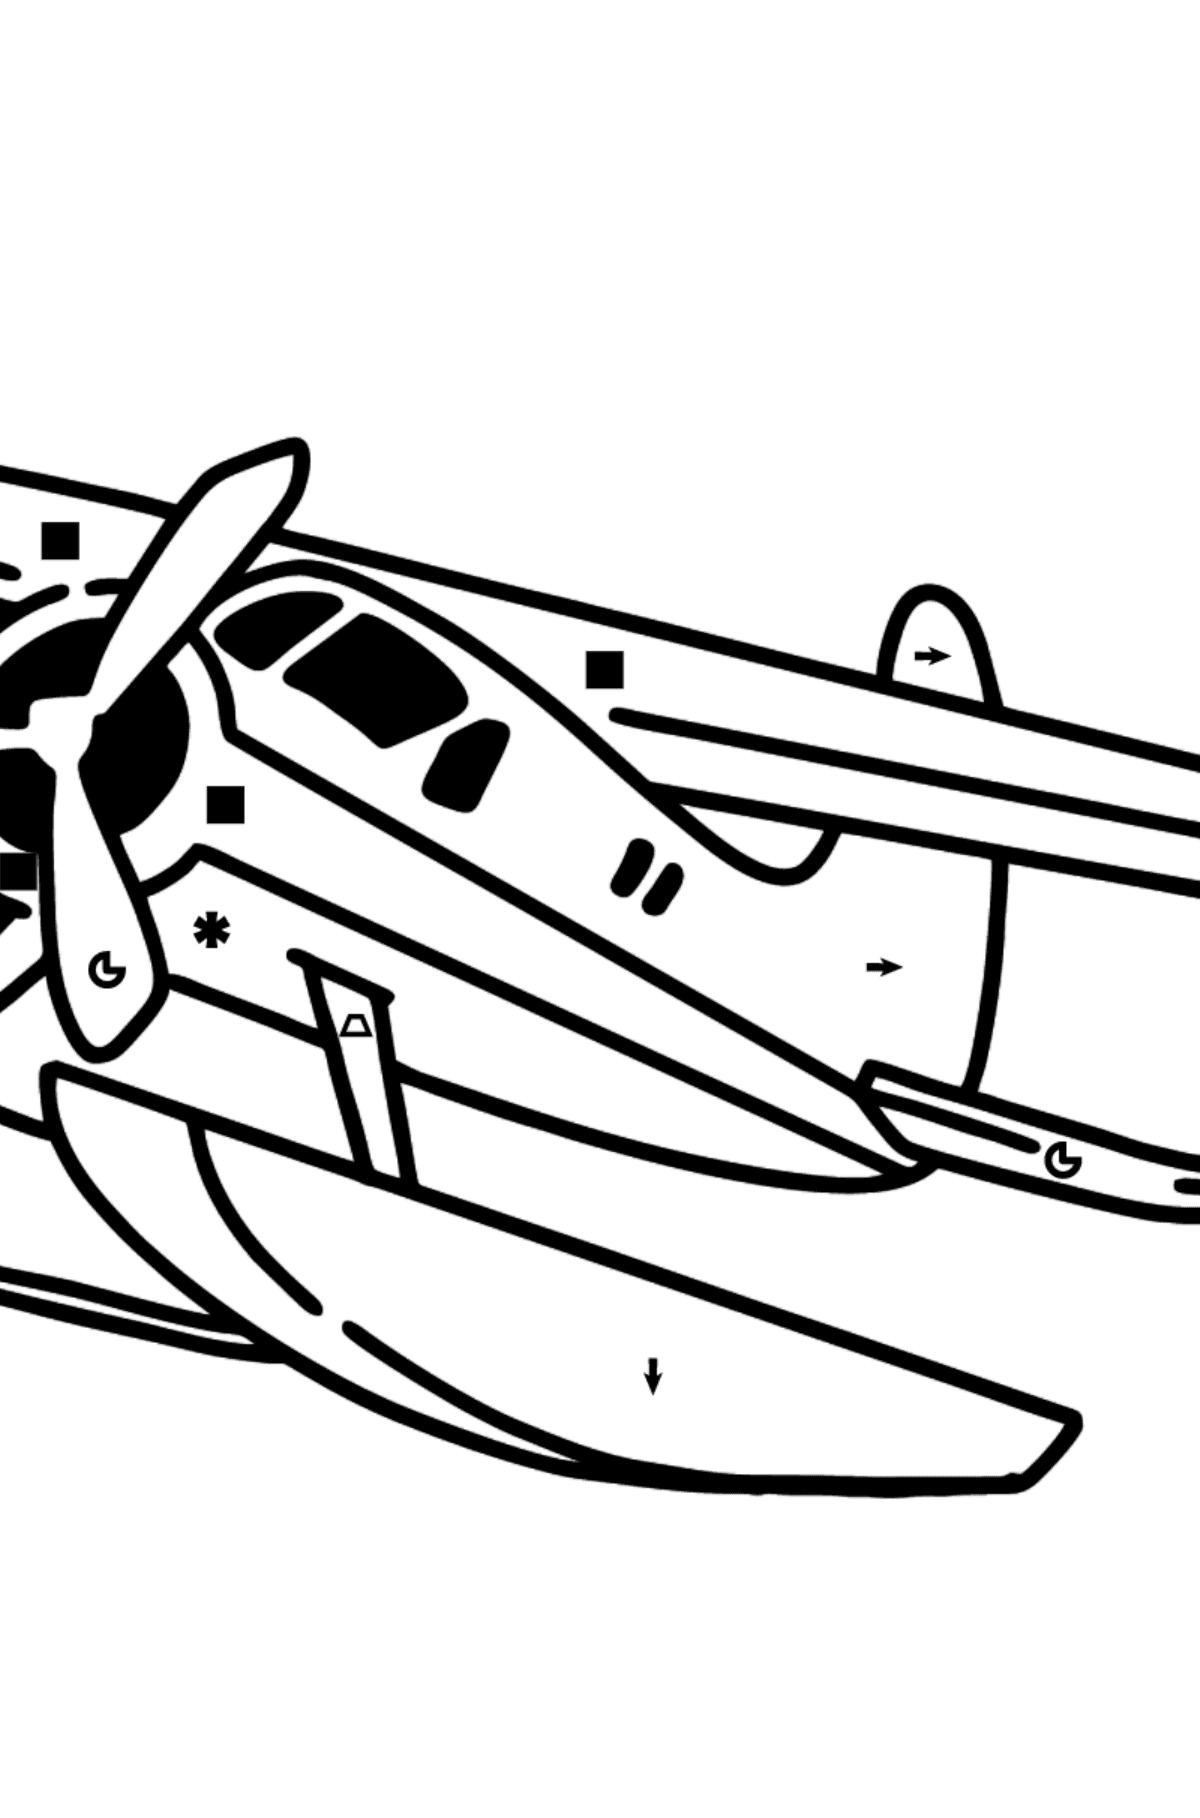 Jet Airplane BE-200 coloring page - Coloring by Symbols and Geometric Shapes for Kids